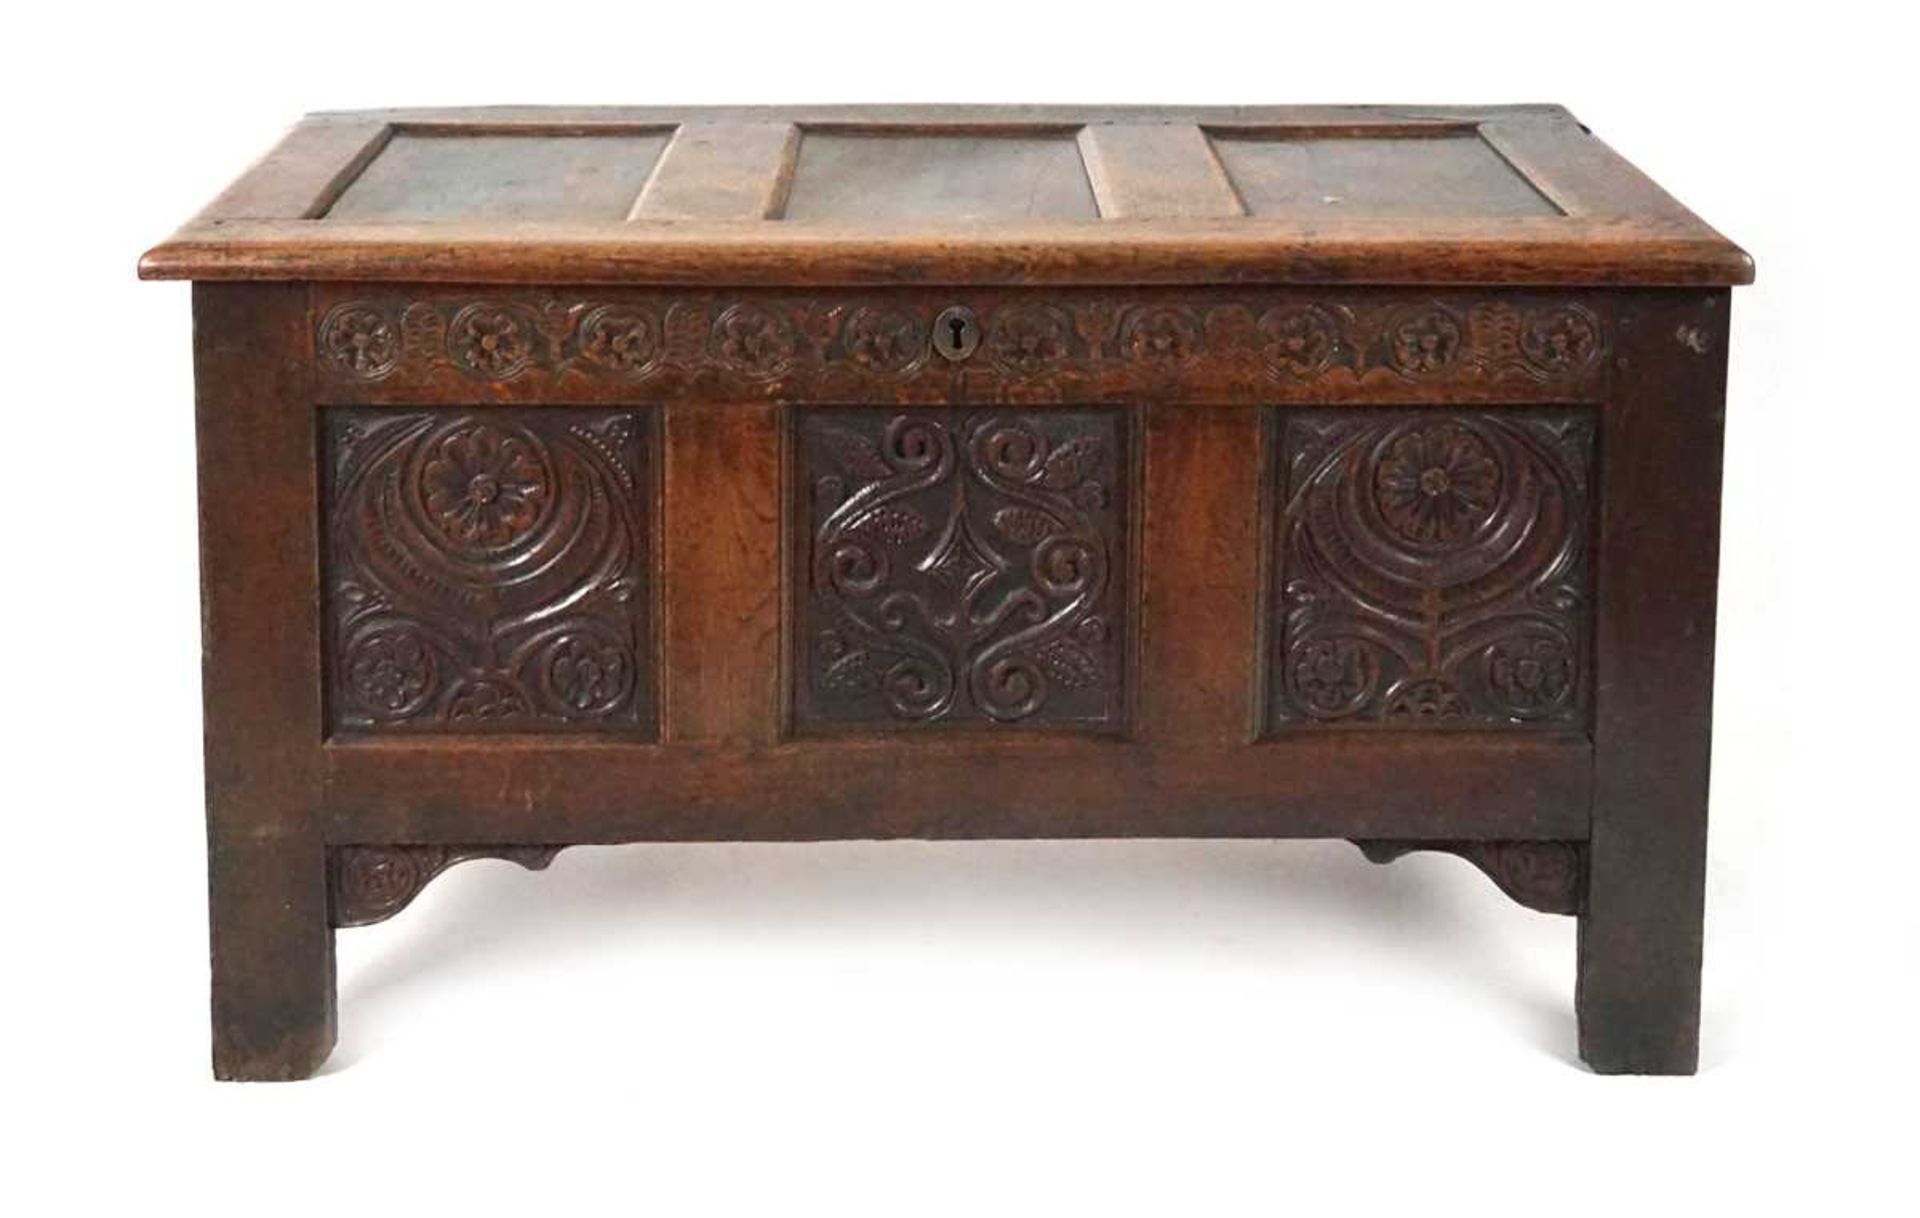 An 18th century oak coffer, the top with three recessed panels, above a carved frieze of roses and